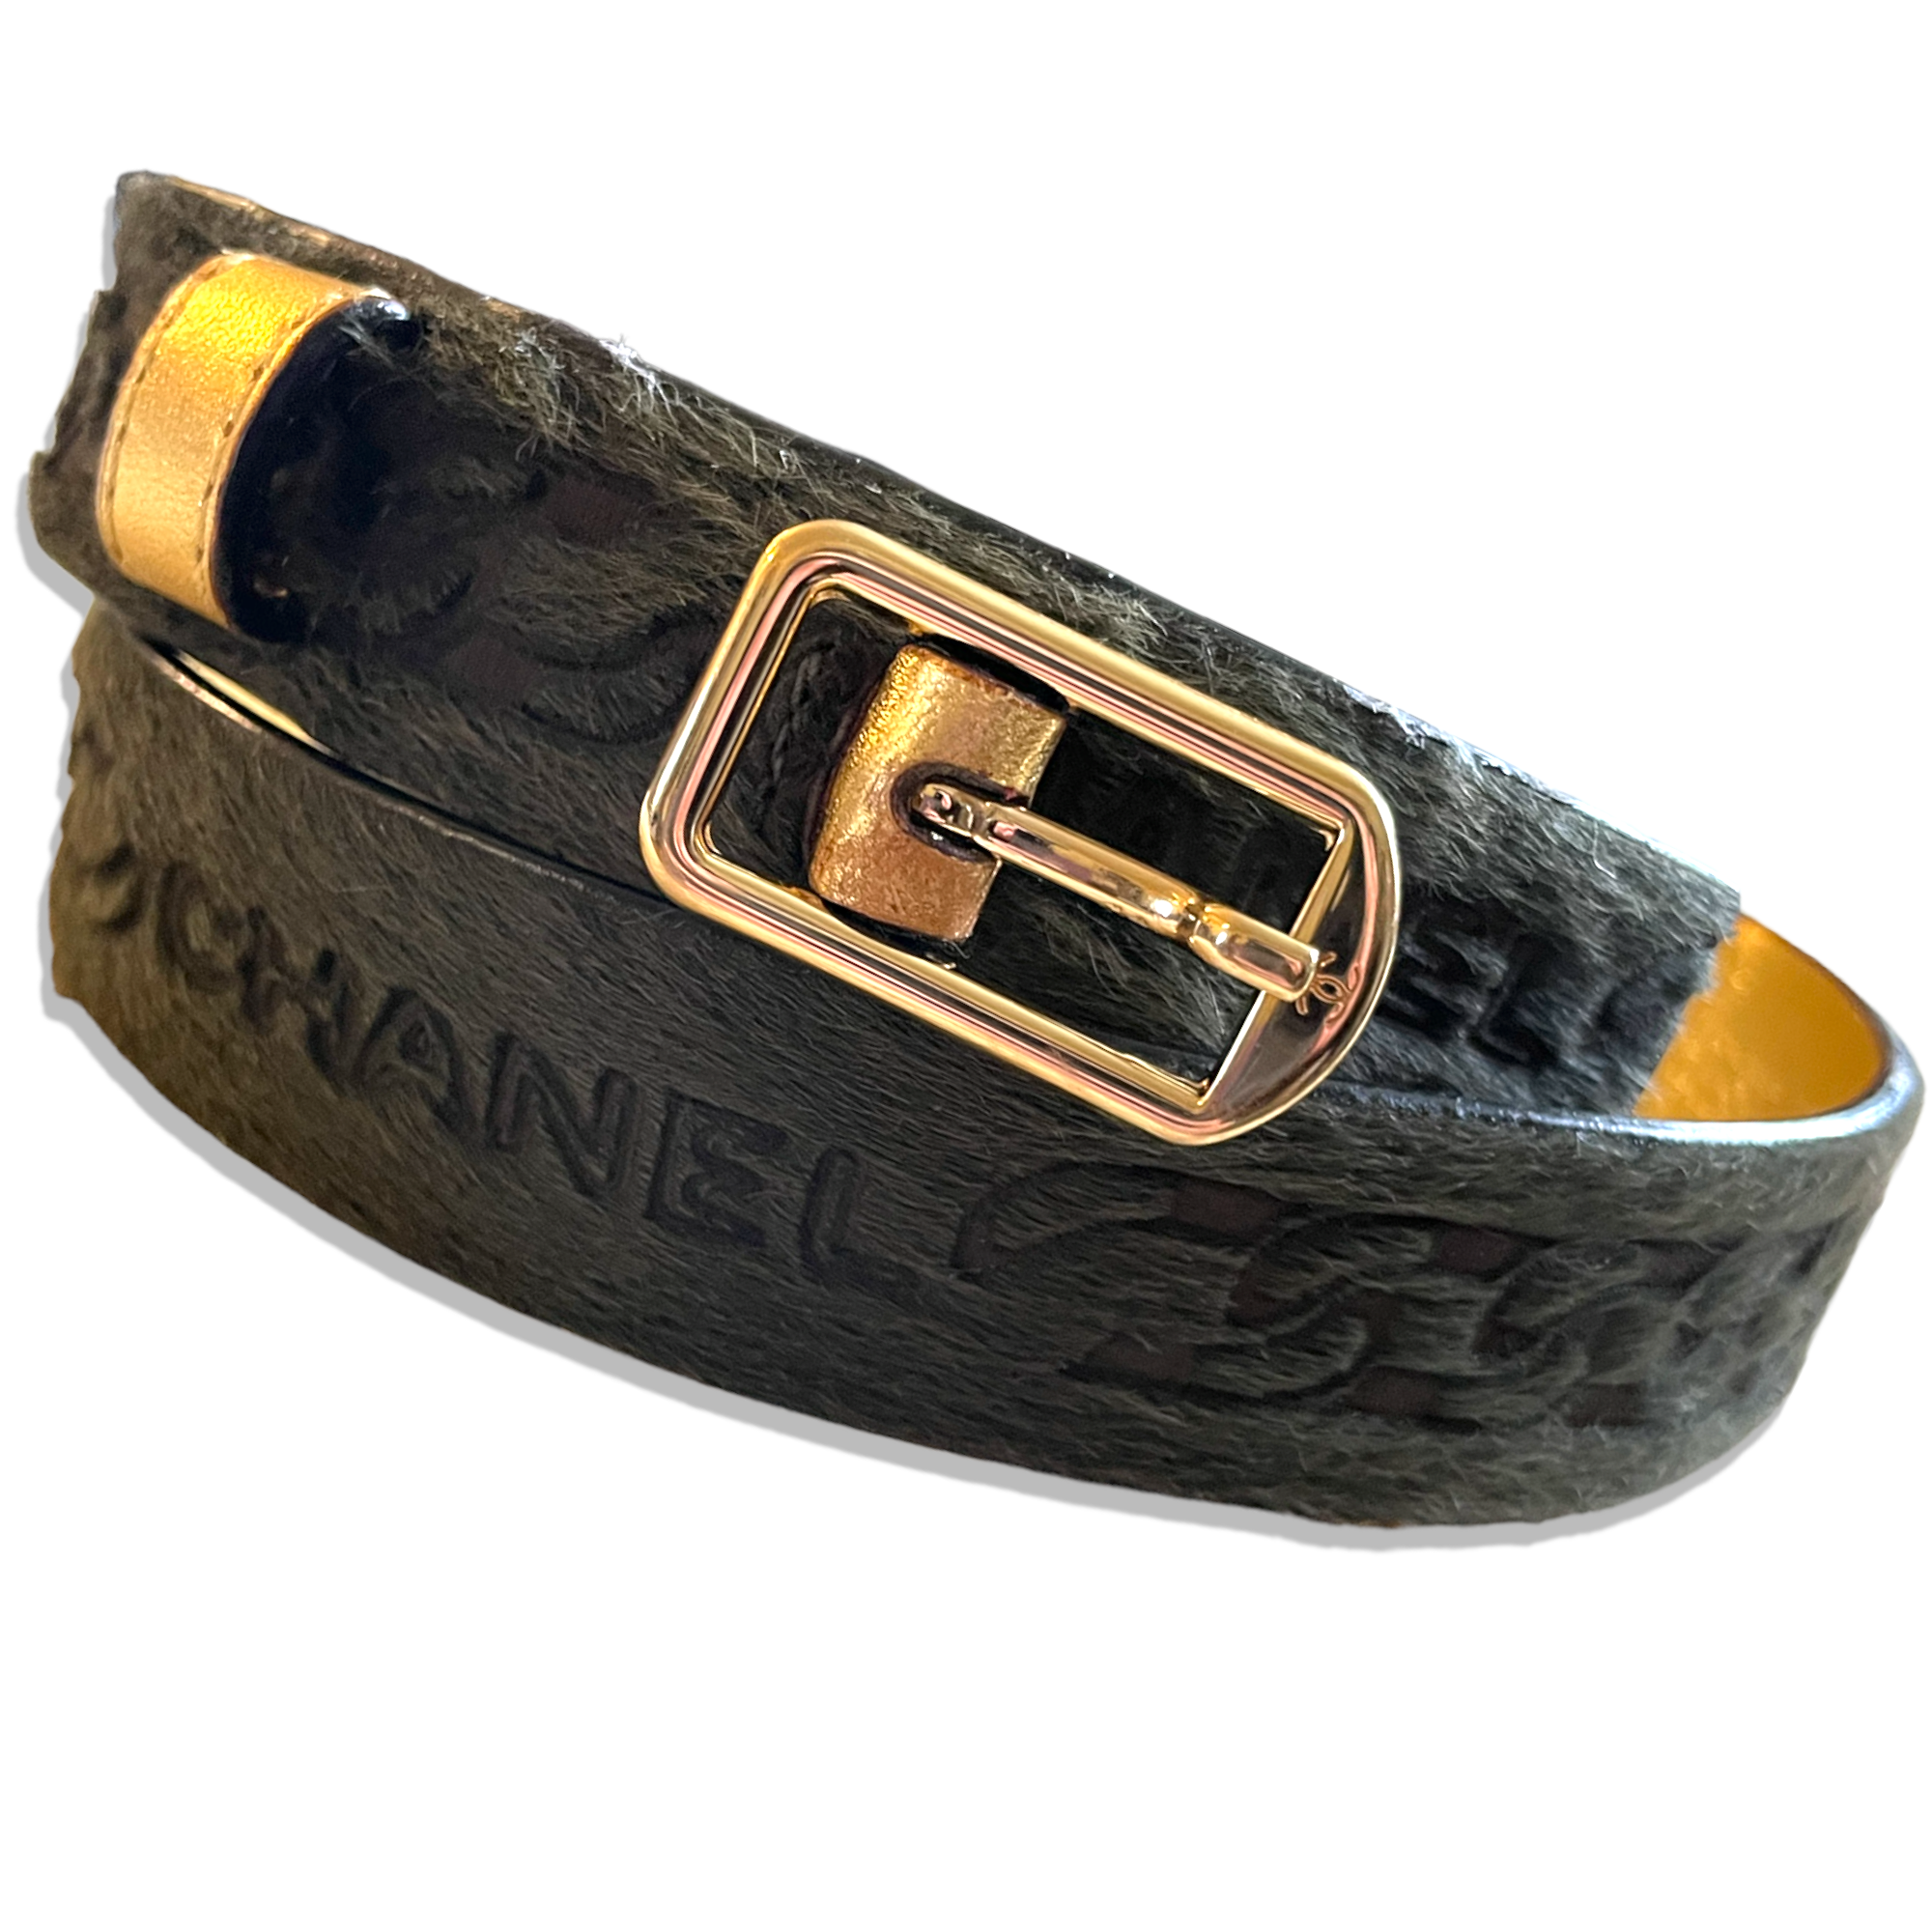 CHANEL Buckle Belt Calf Hair and Leather, Size: 70